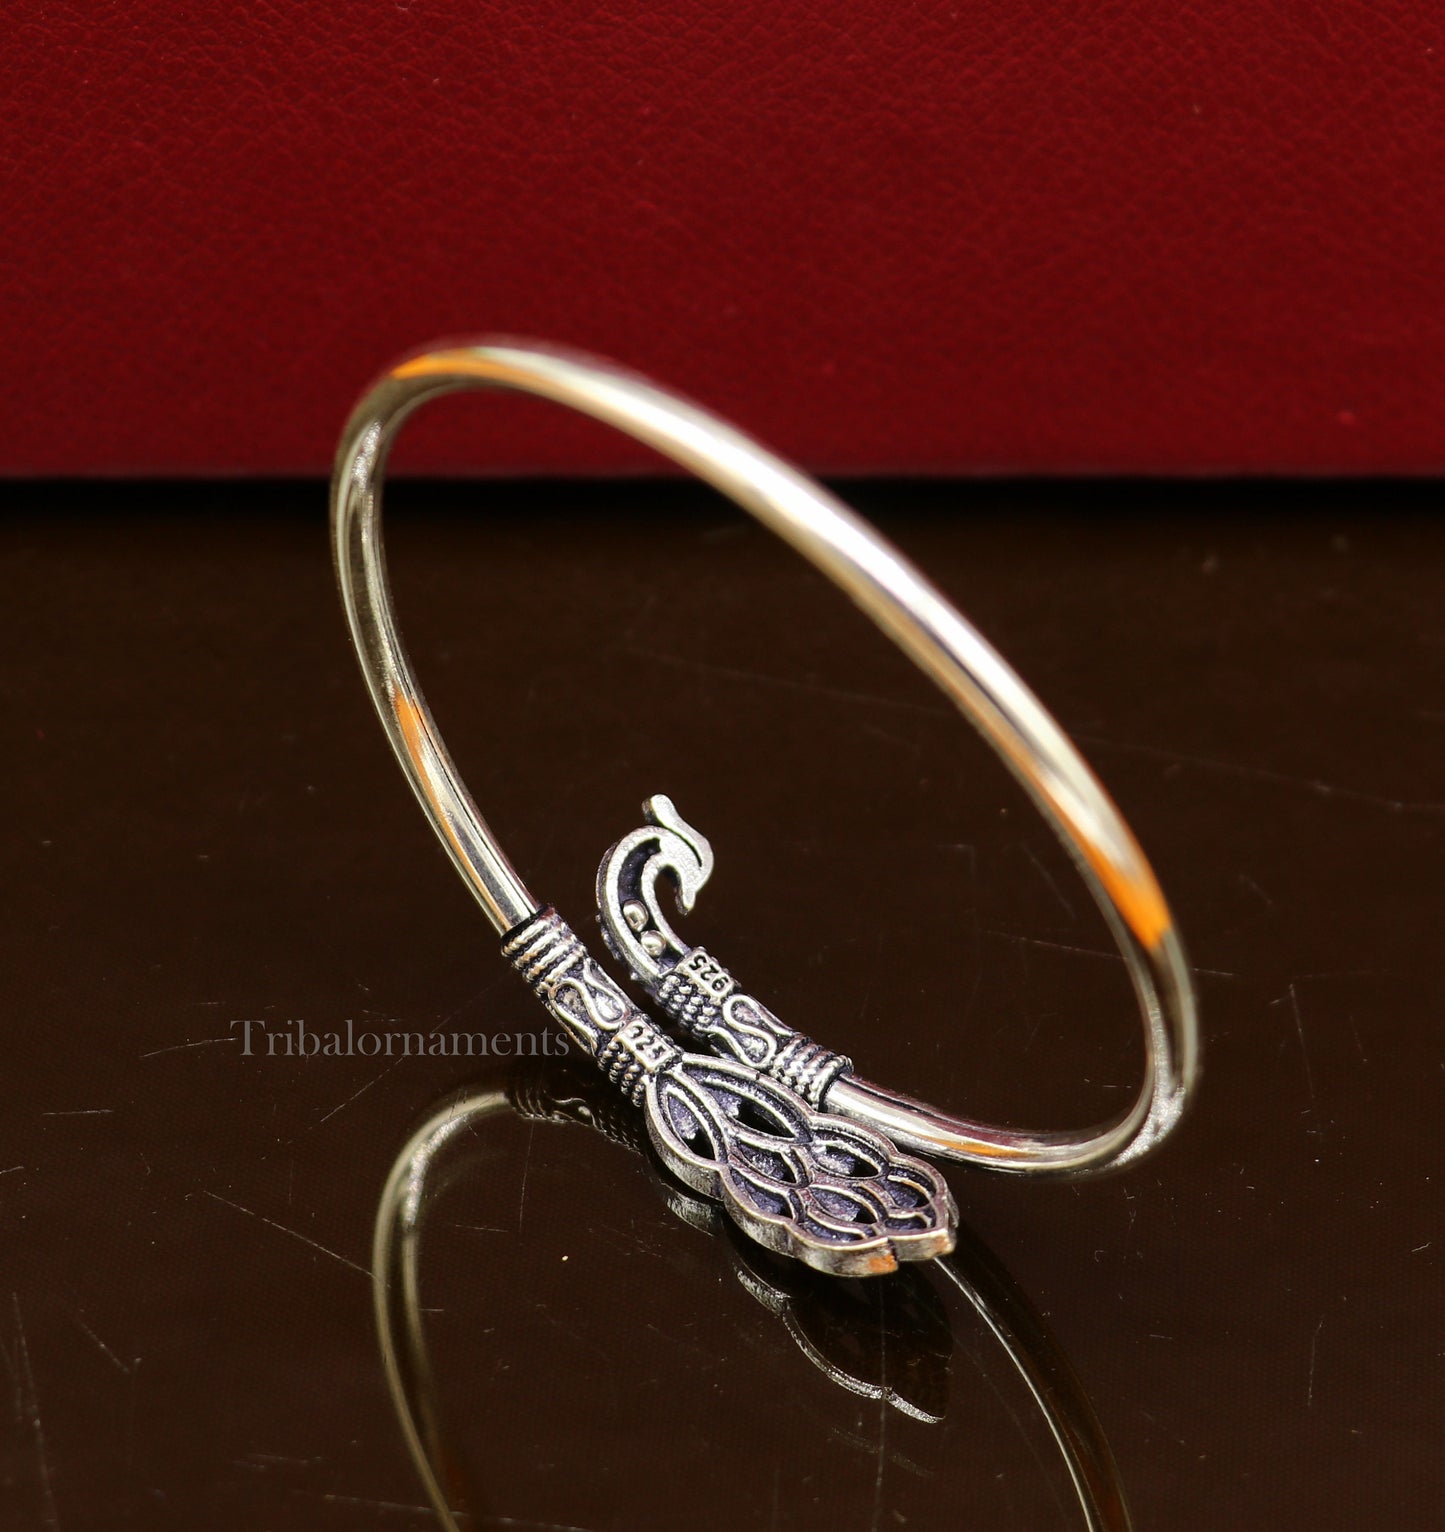 Peacock style 925 sterling silver exclusive design handmade bangle bracelet, easy to plug with your wrist, pure silver kada jewelry nba199 - TRIBAL ORNAMENTS